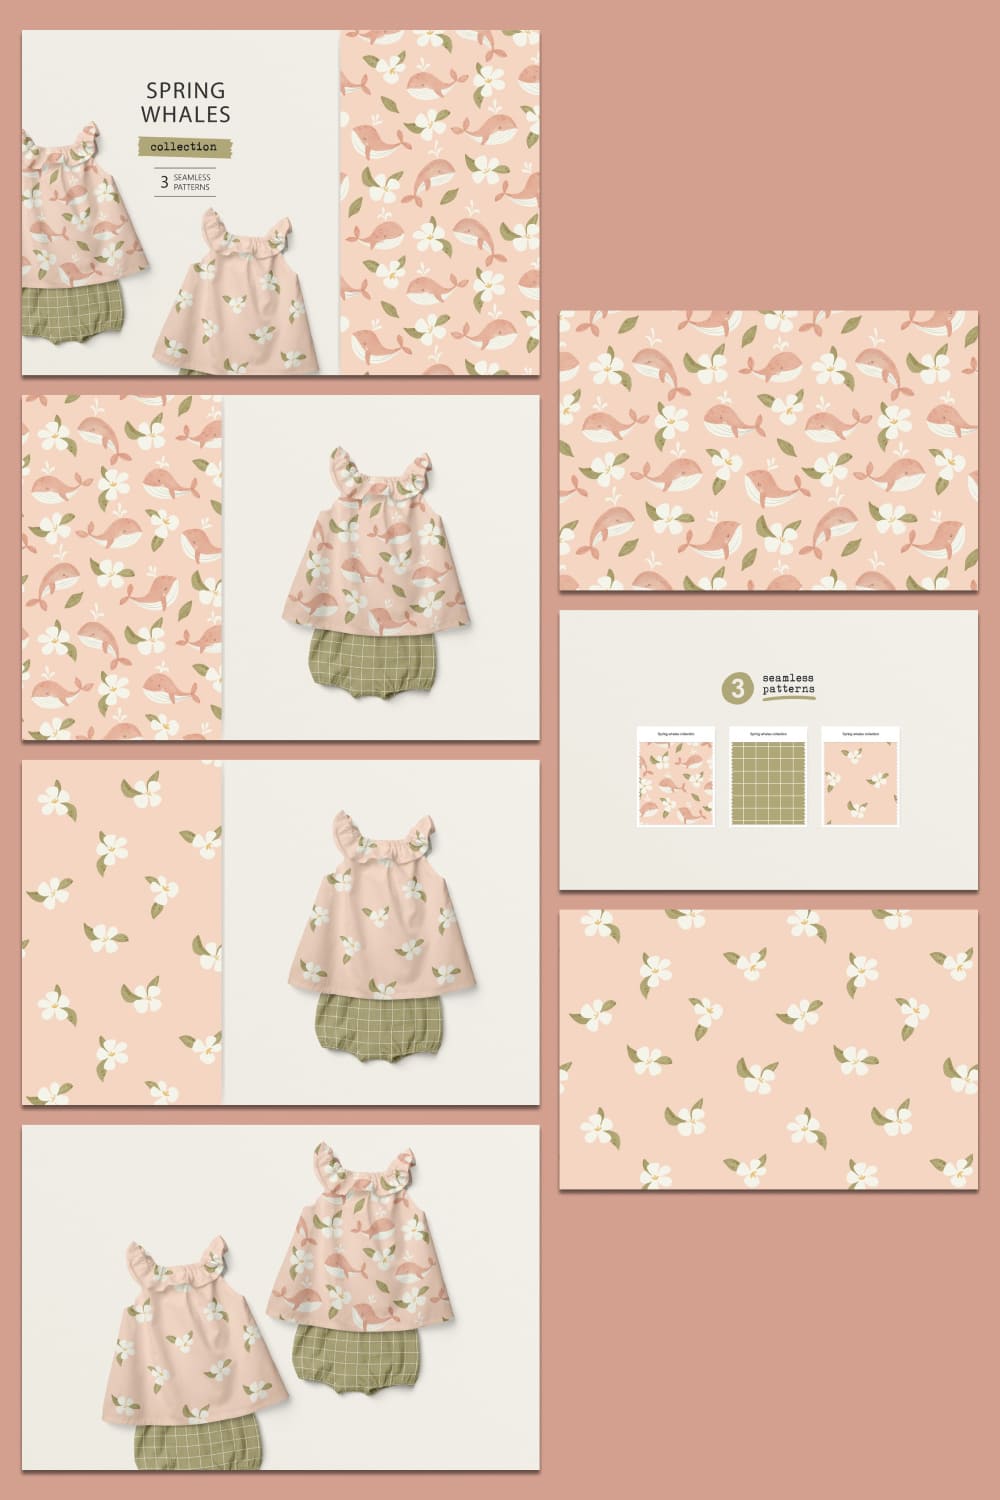 spring whales patterns collection.